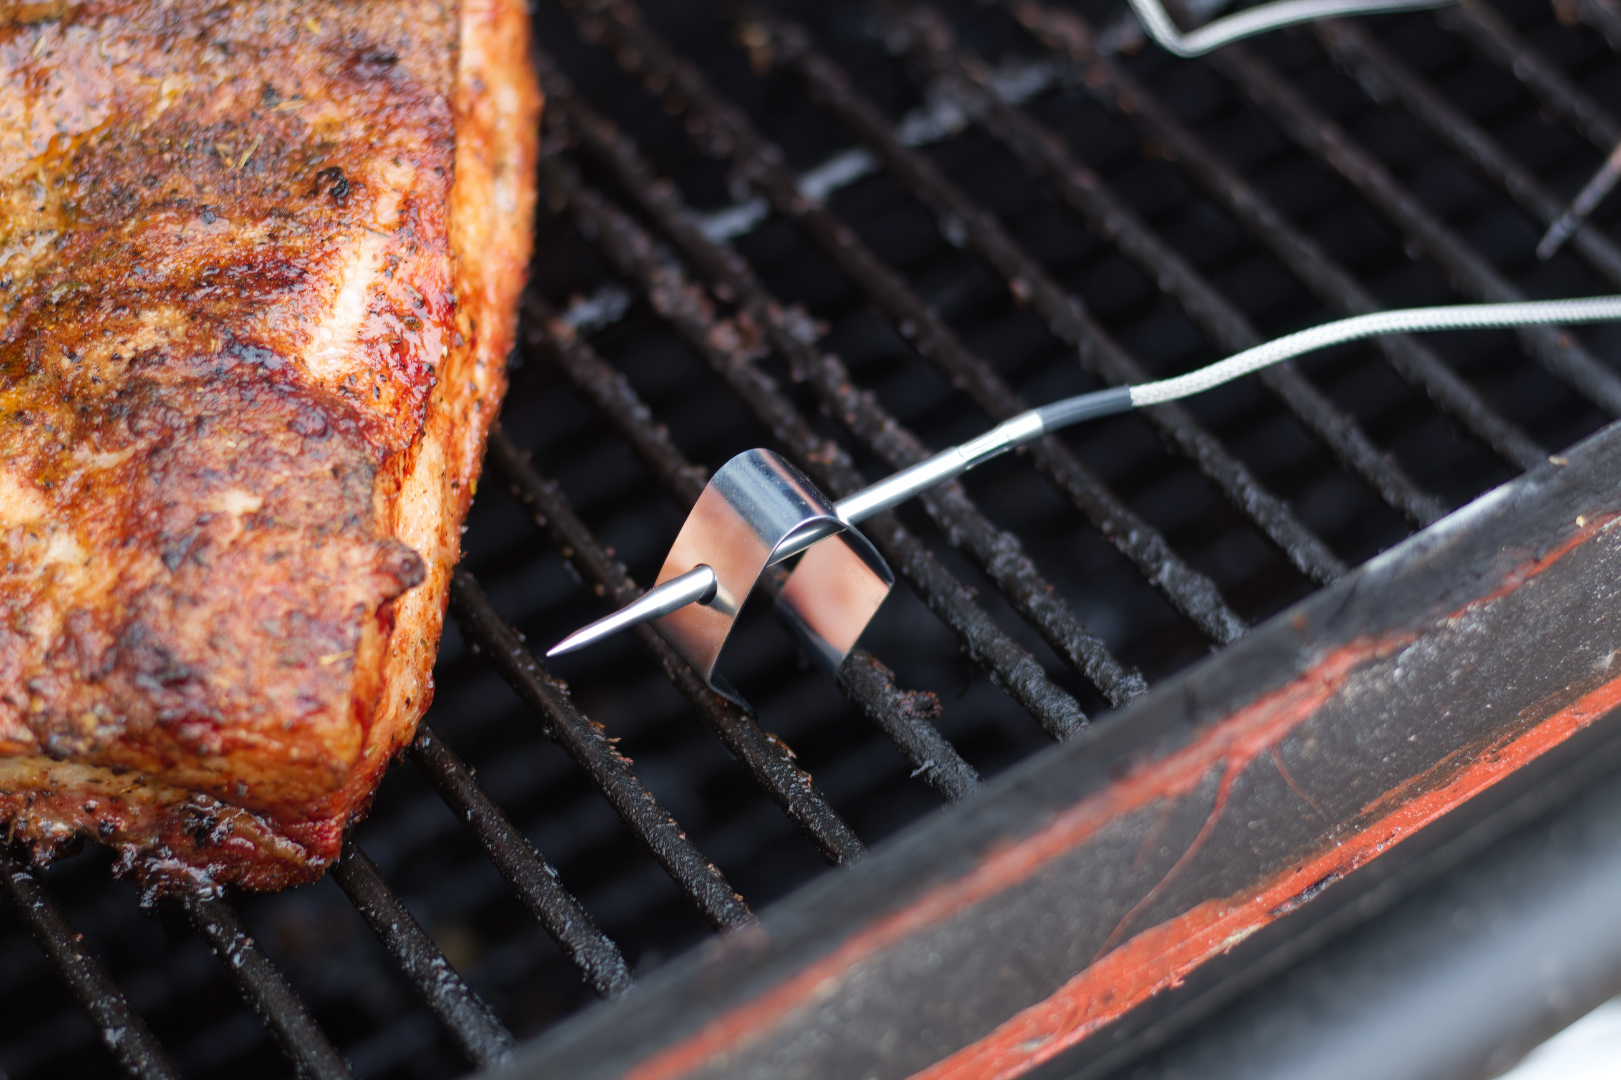 XR-50 Remote BBQ & Smoker Thermometer